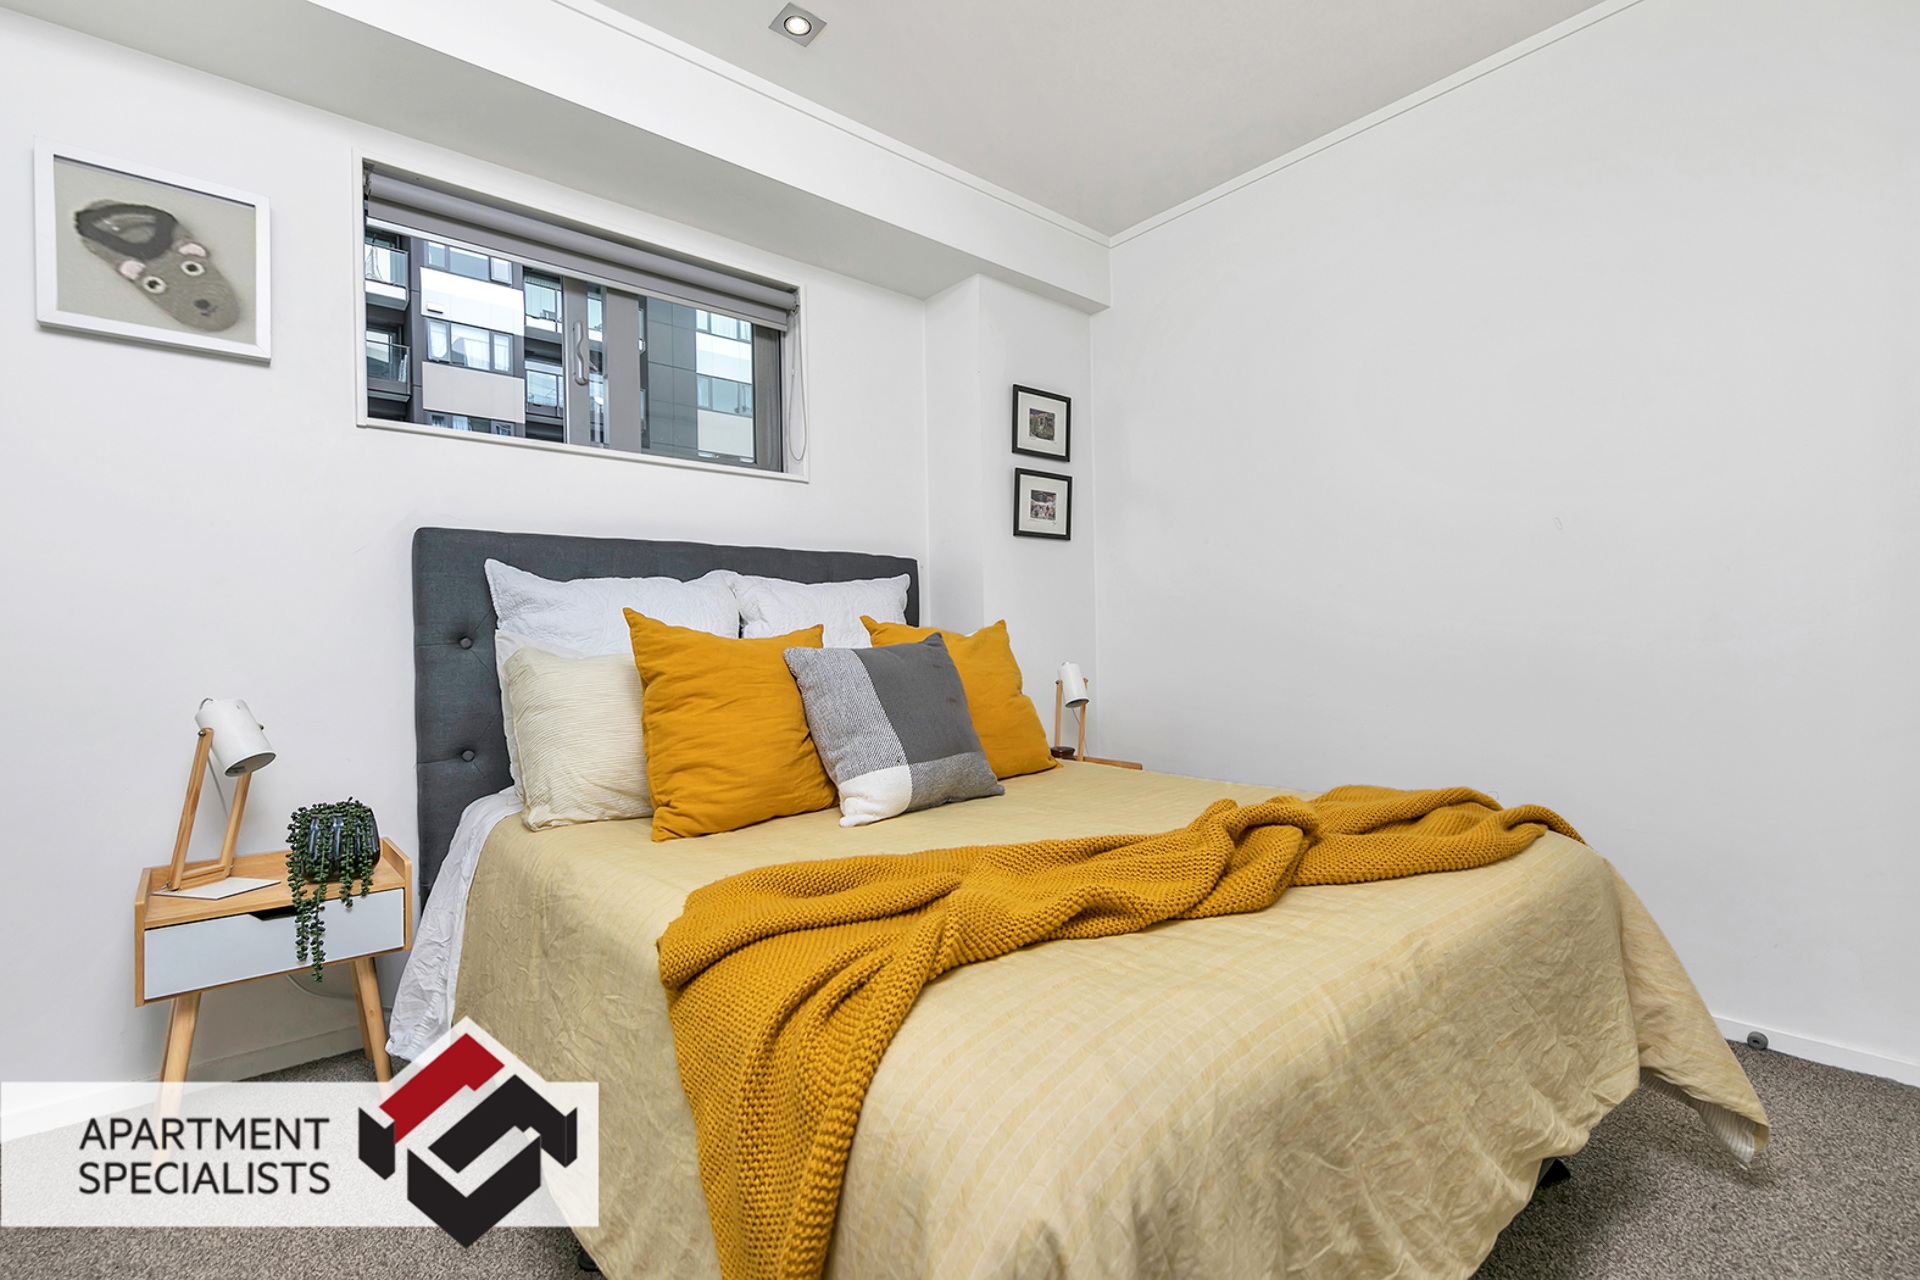 9 | 430 Queen Street, City Centre | Apartment Specialists